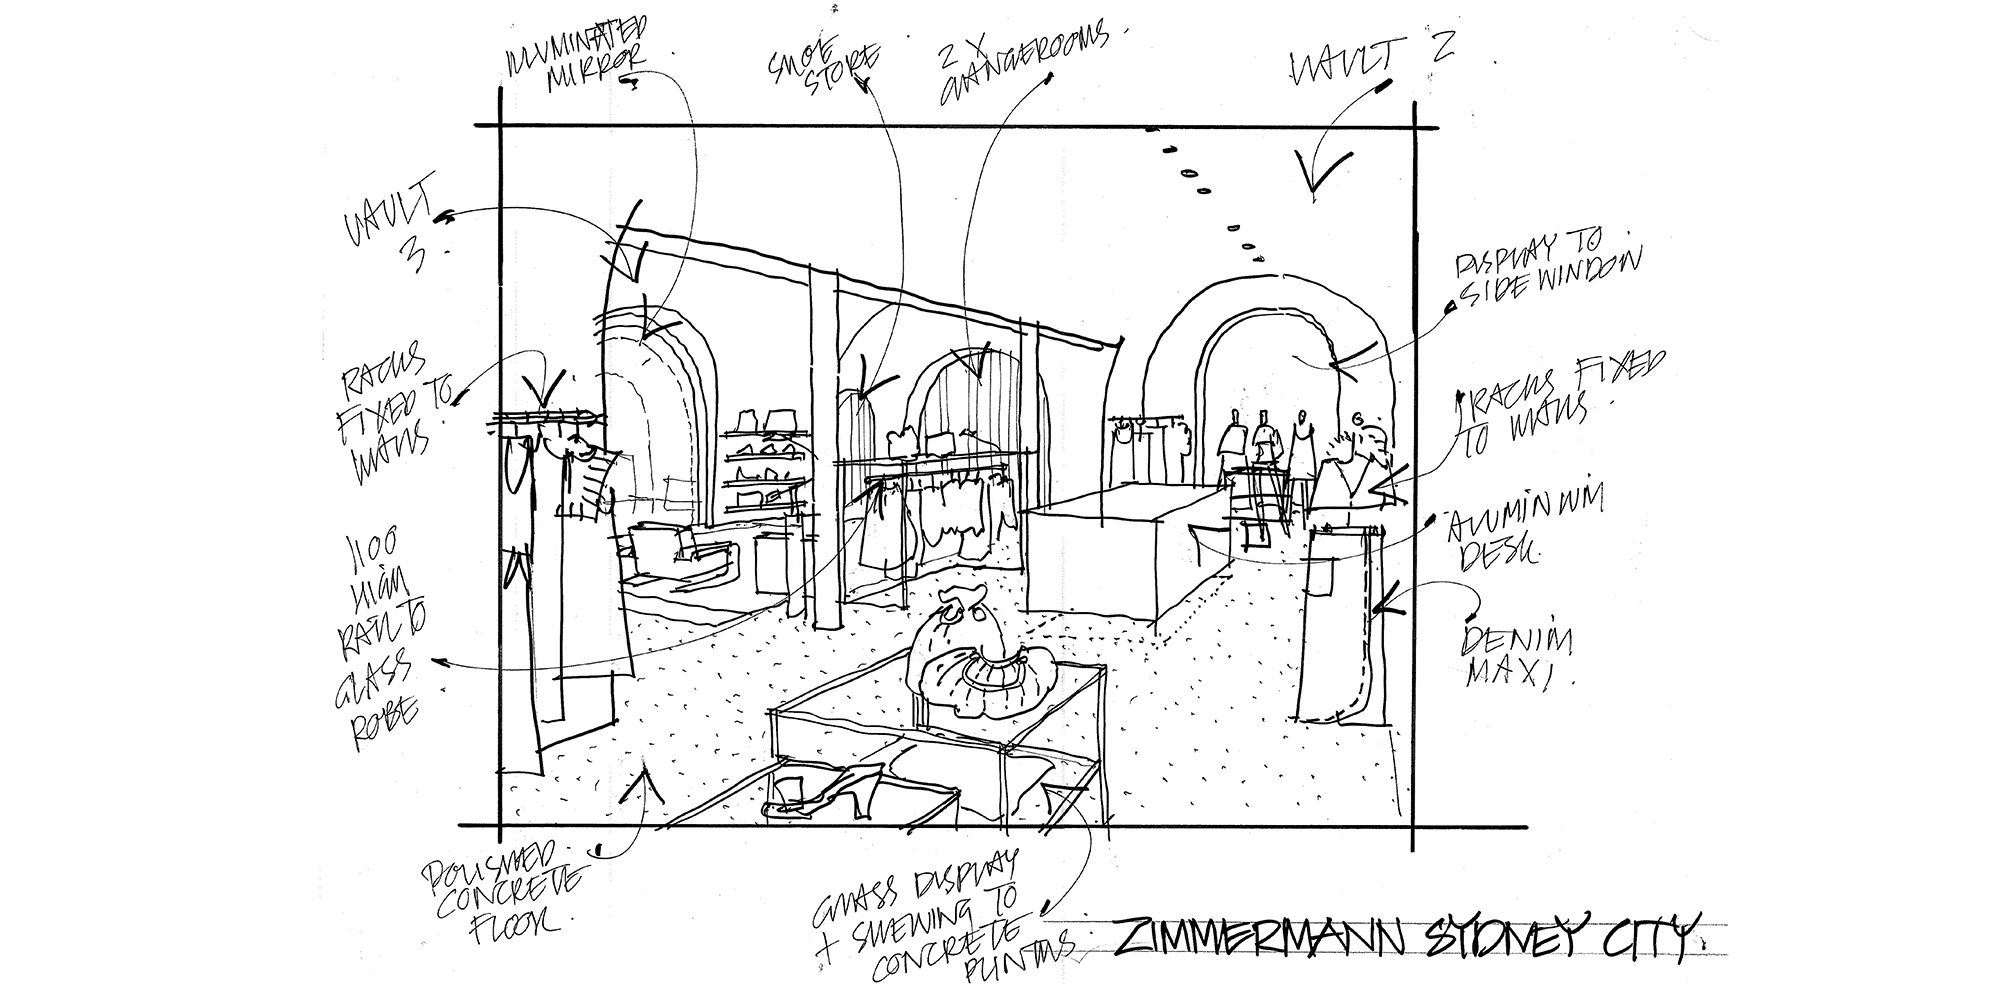 An original sketch by Don McQualter of our Sydney CBD store